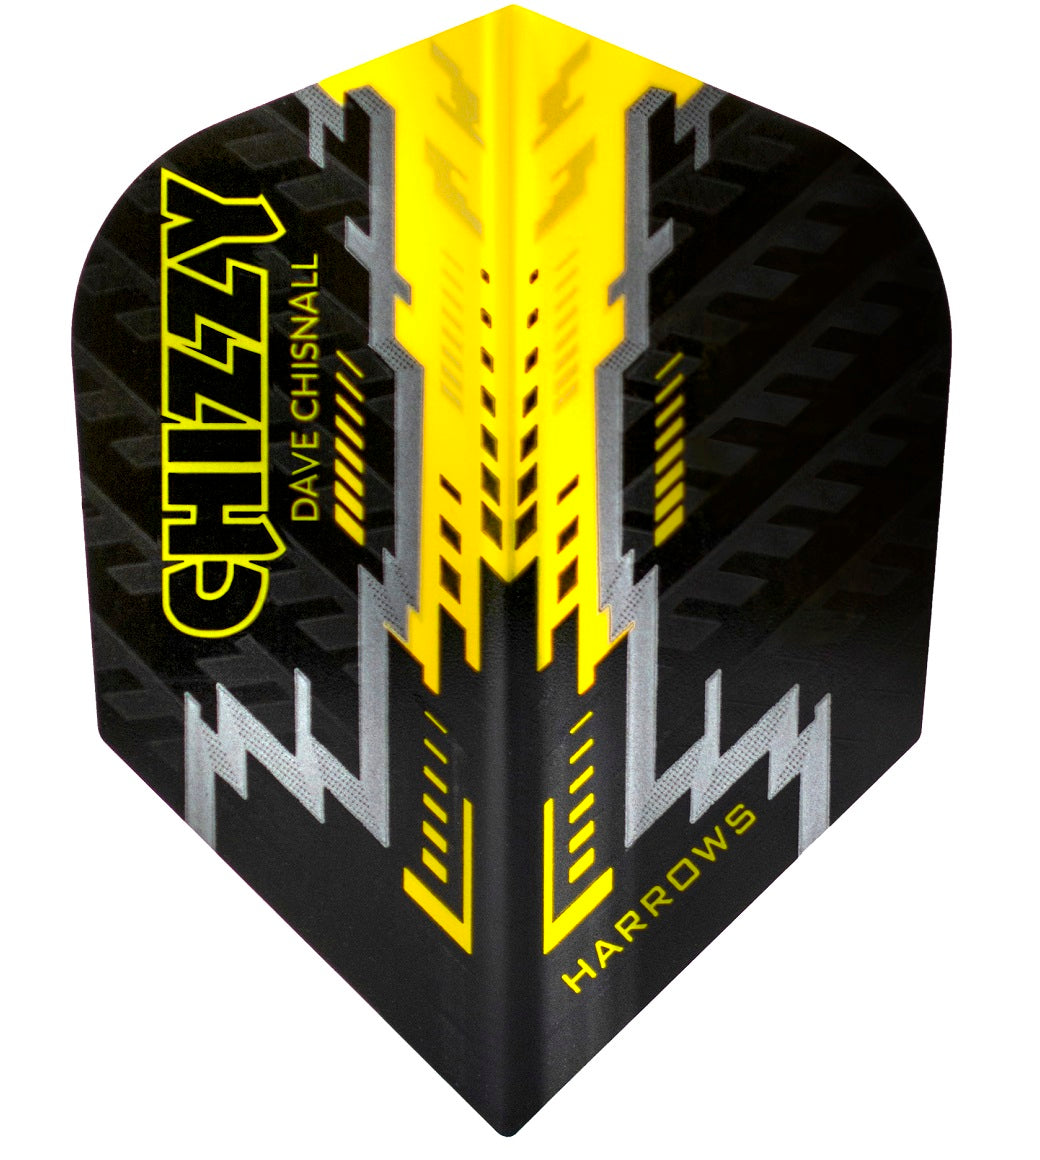 Dave Chisnall Black and Yellow Chizzy Dart Flights by Harrows - 7532